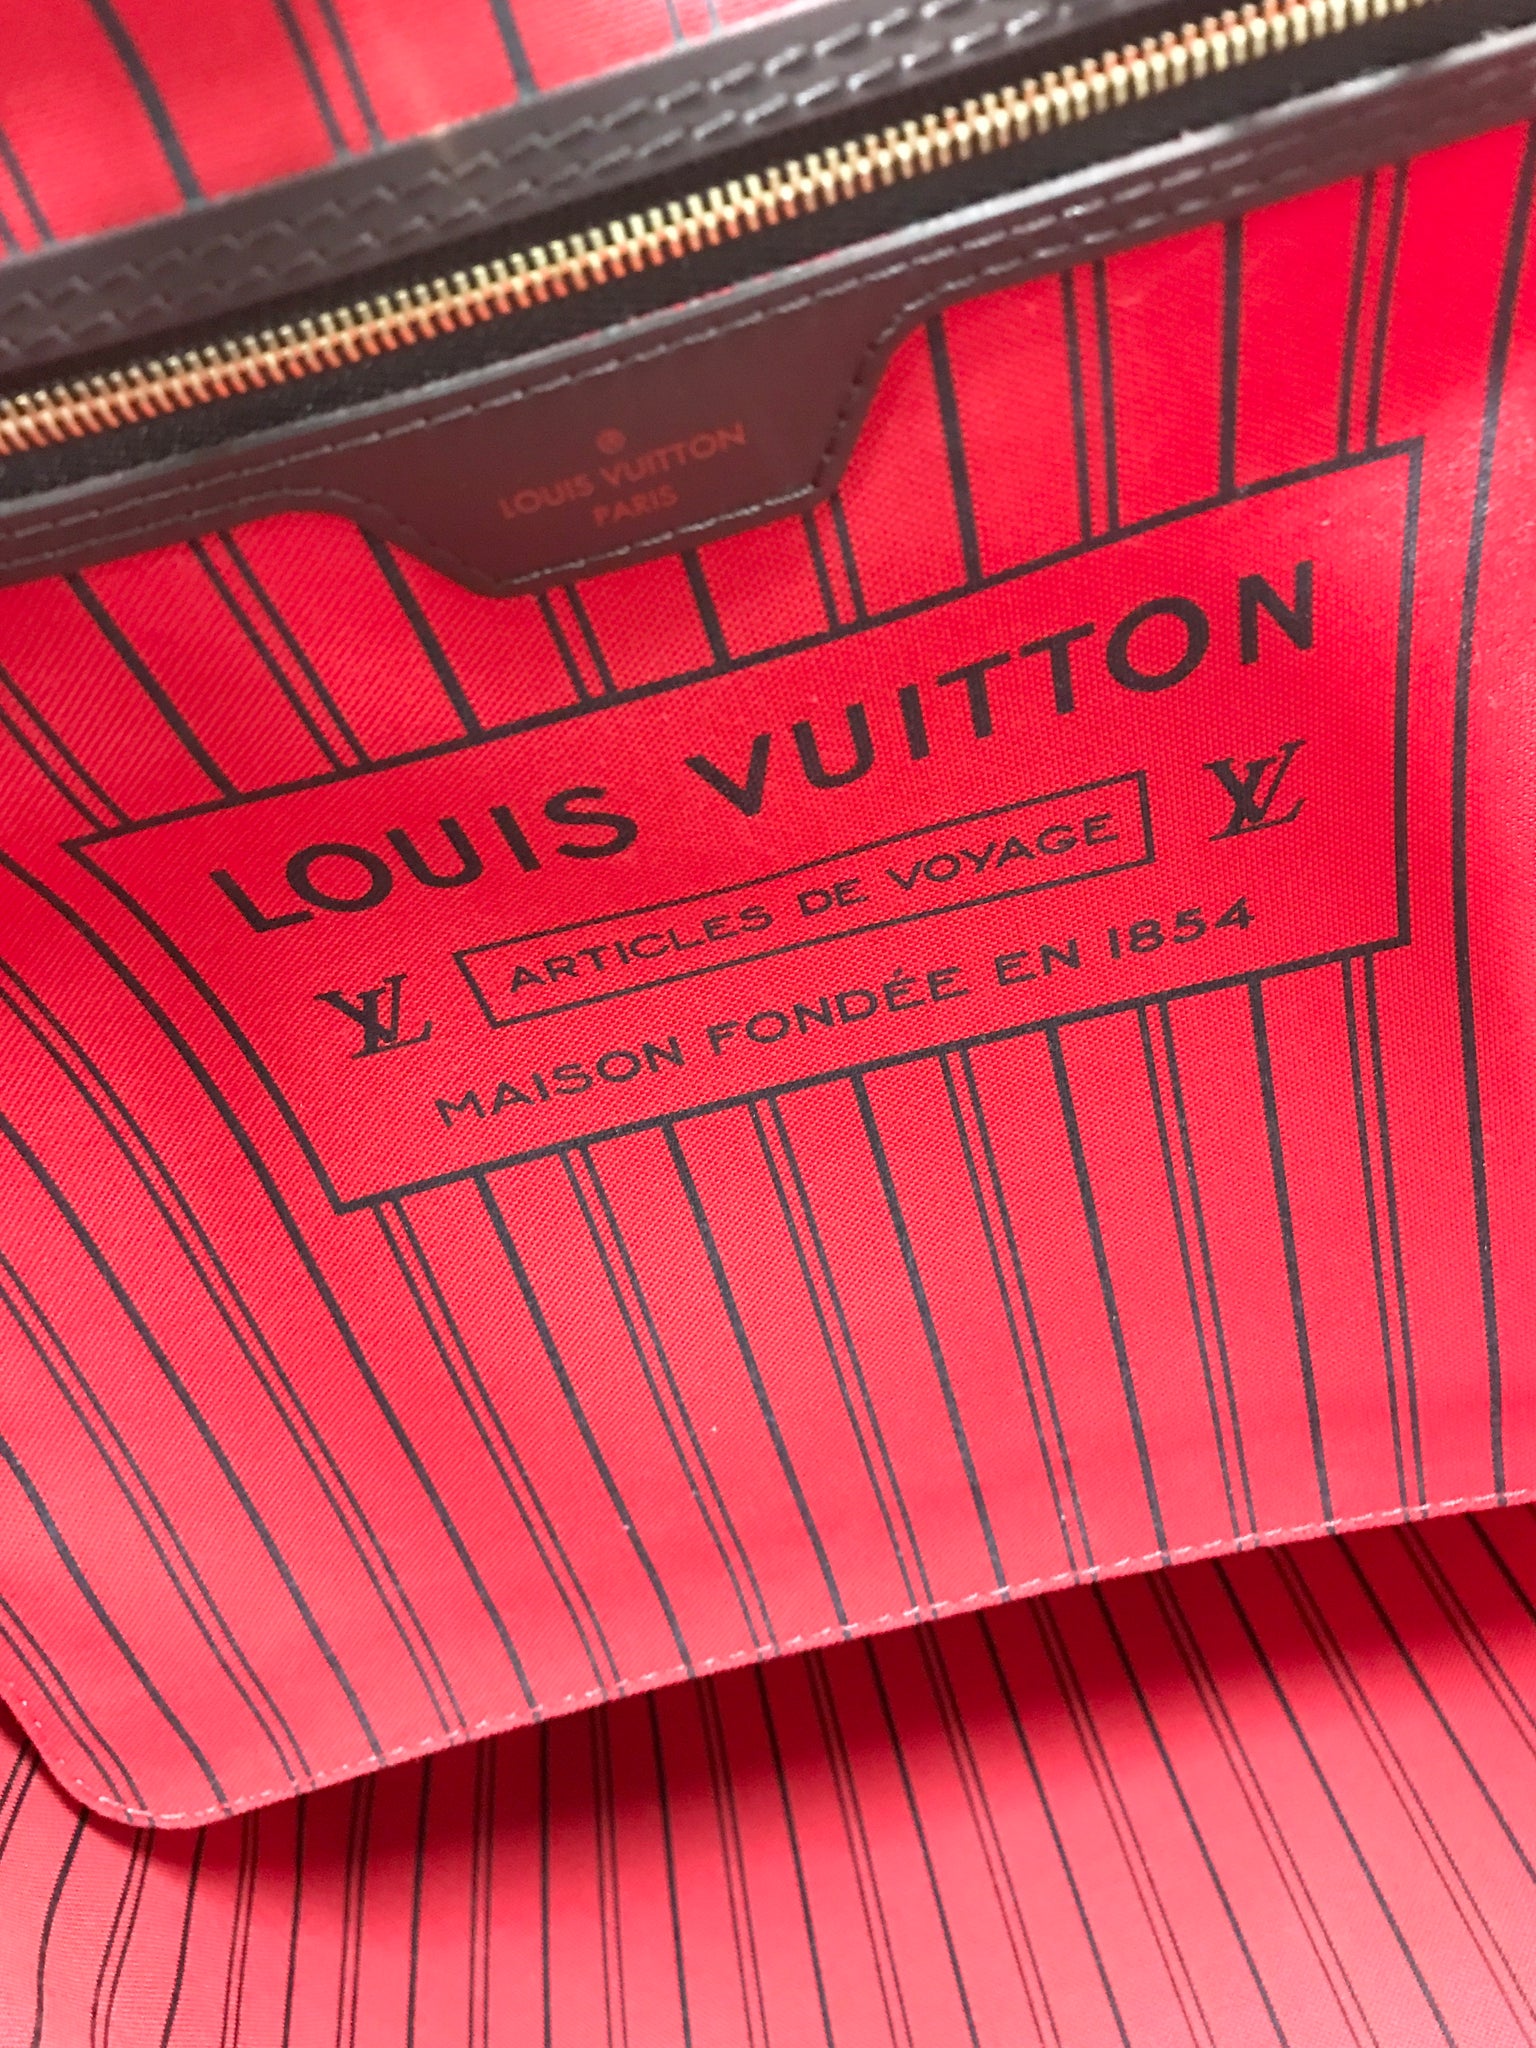 SOLD 🤎 Authentic Pre-owned #LouisVuitton Monogram Neverfull GM